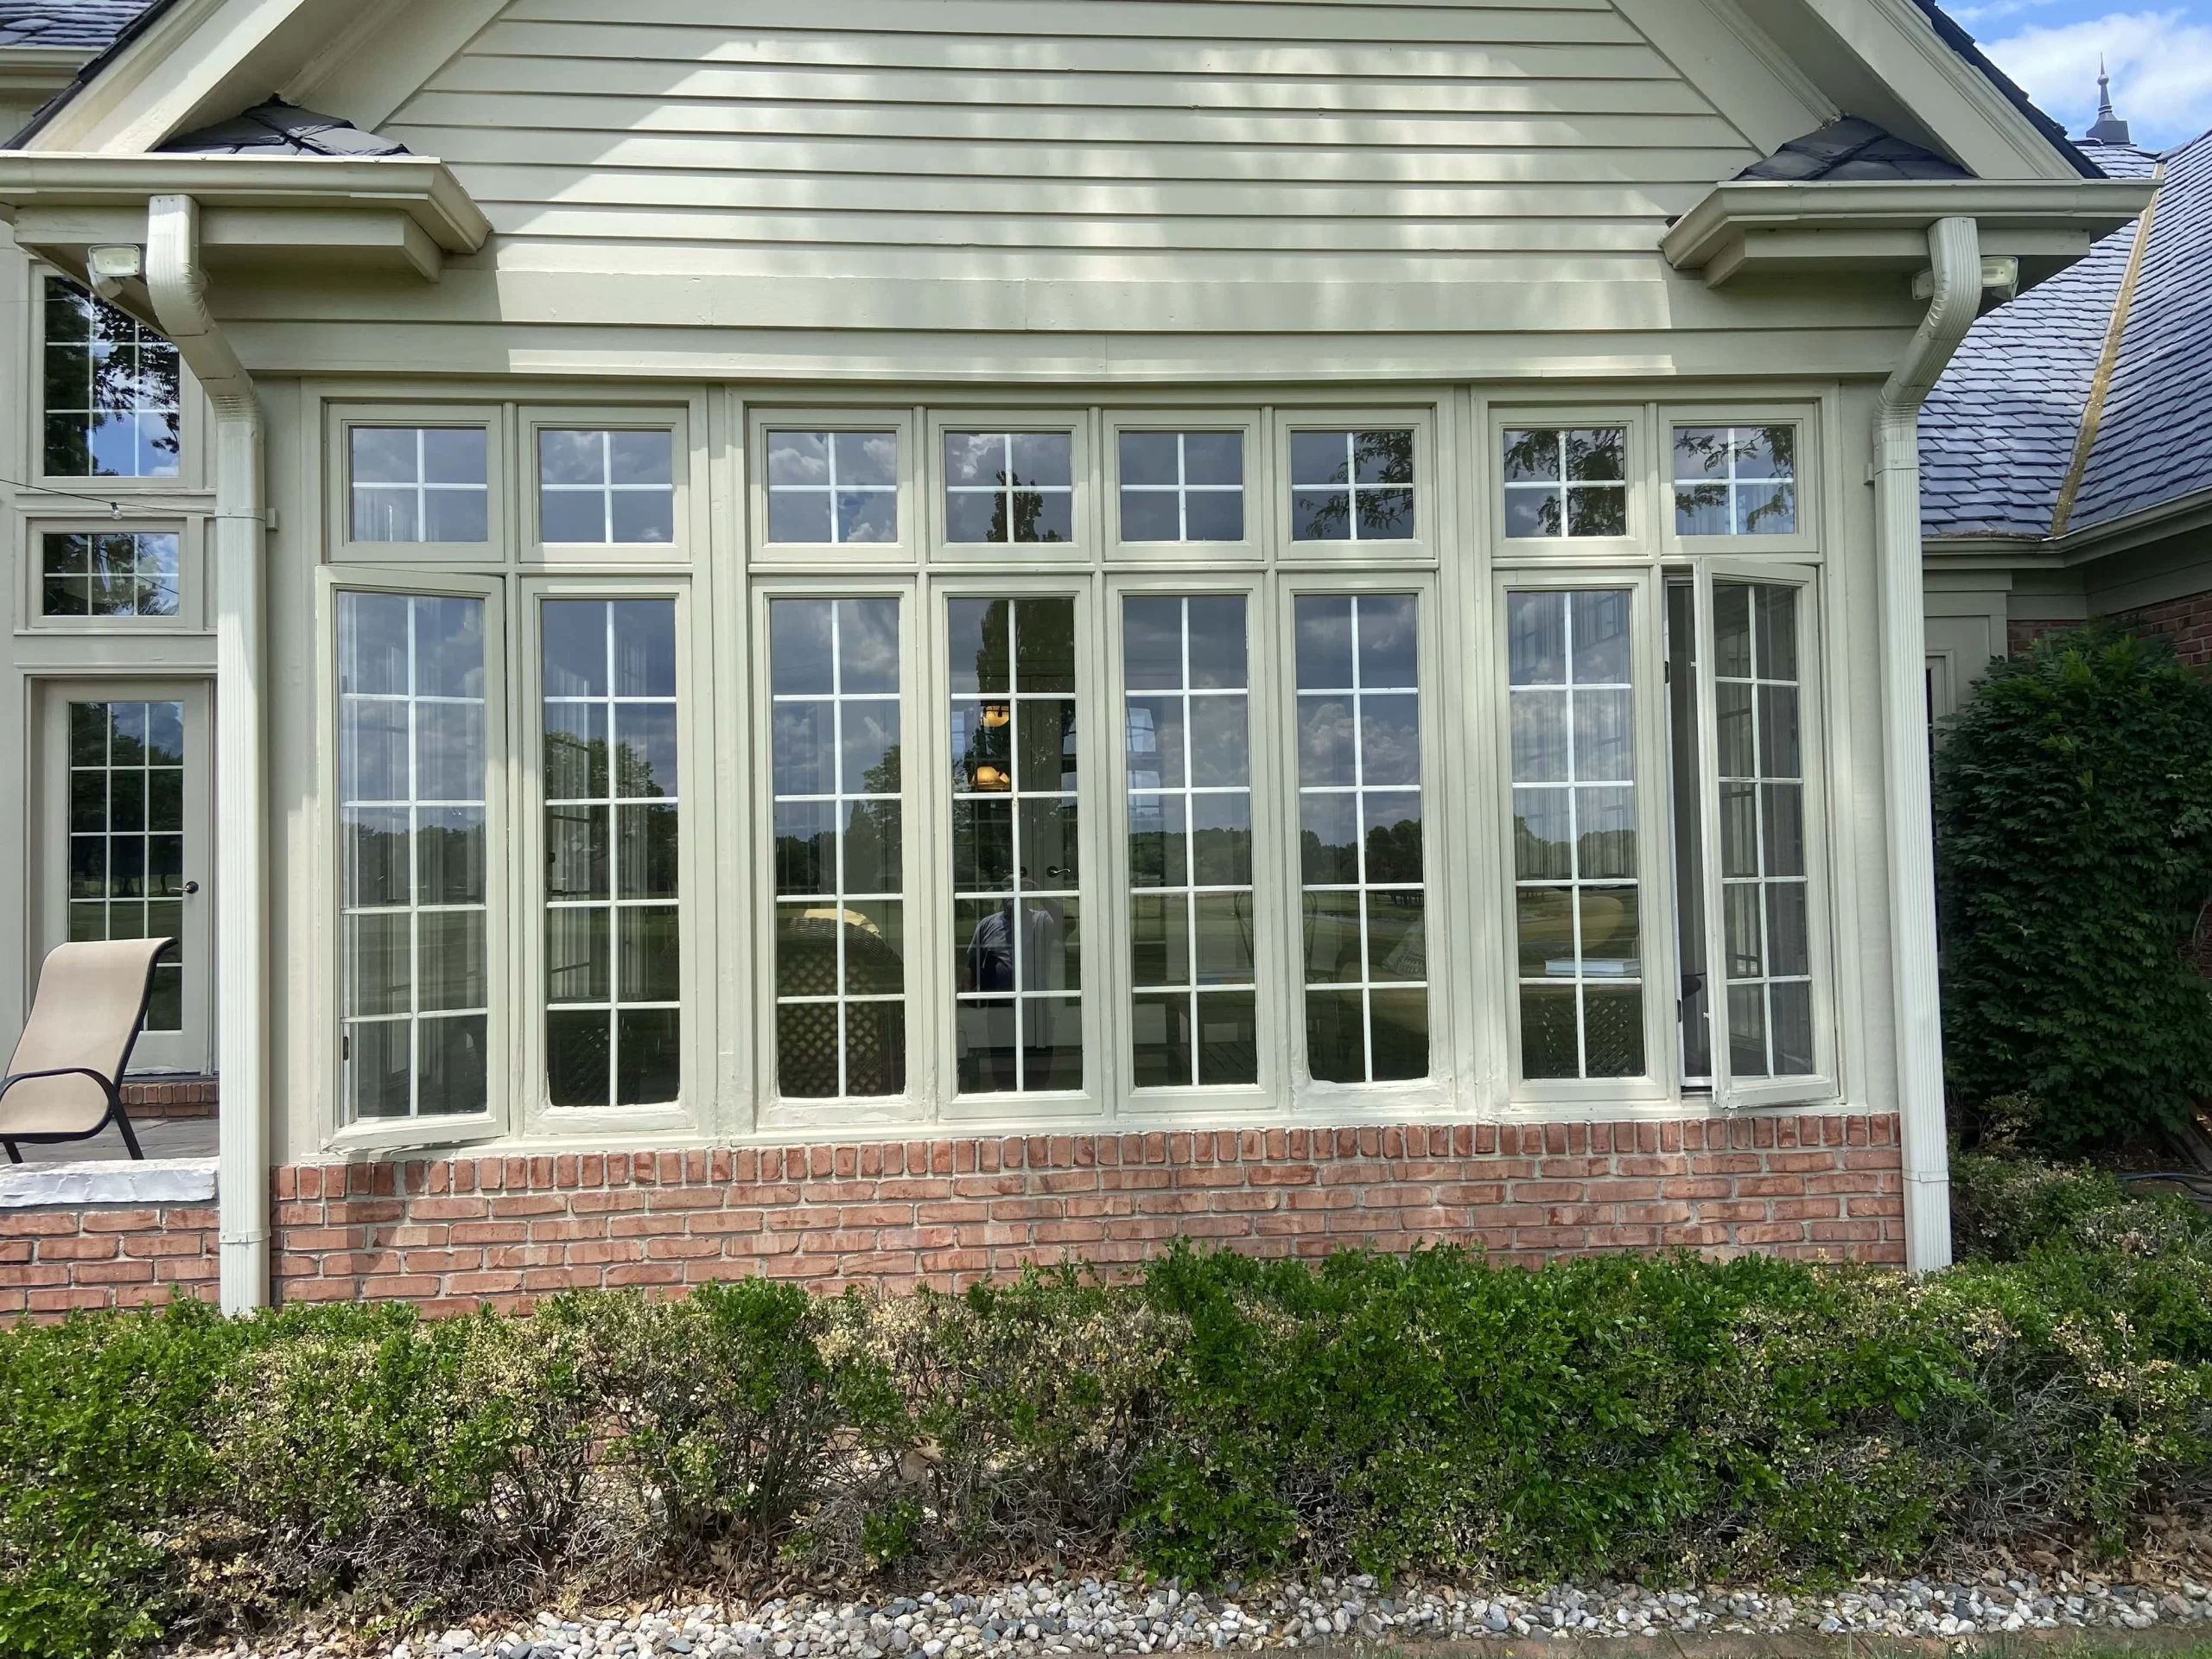 Rotten Wood Window Frame Repair and Restoration in Barrington, IL